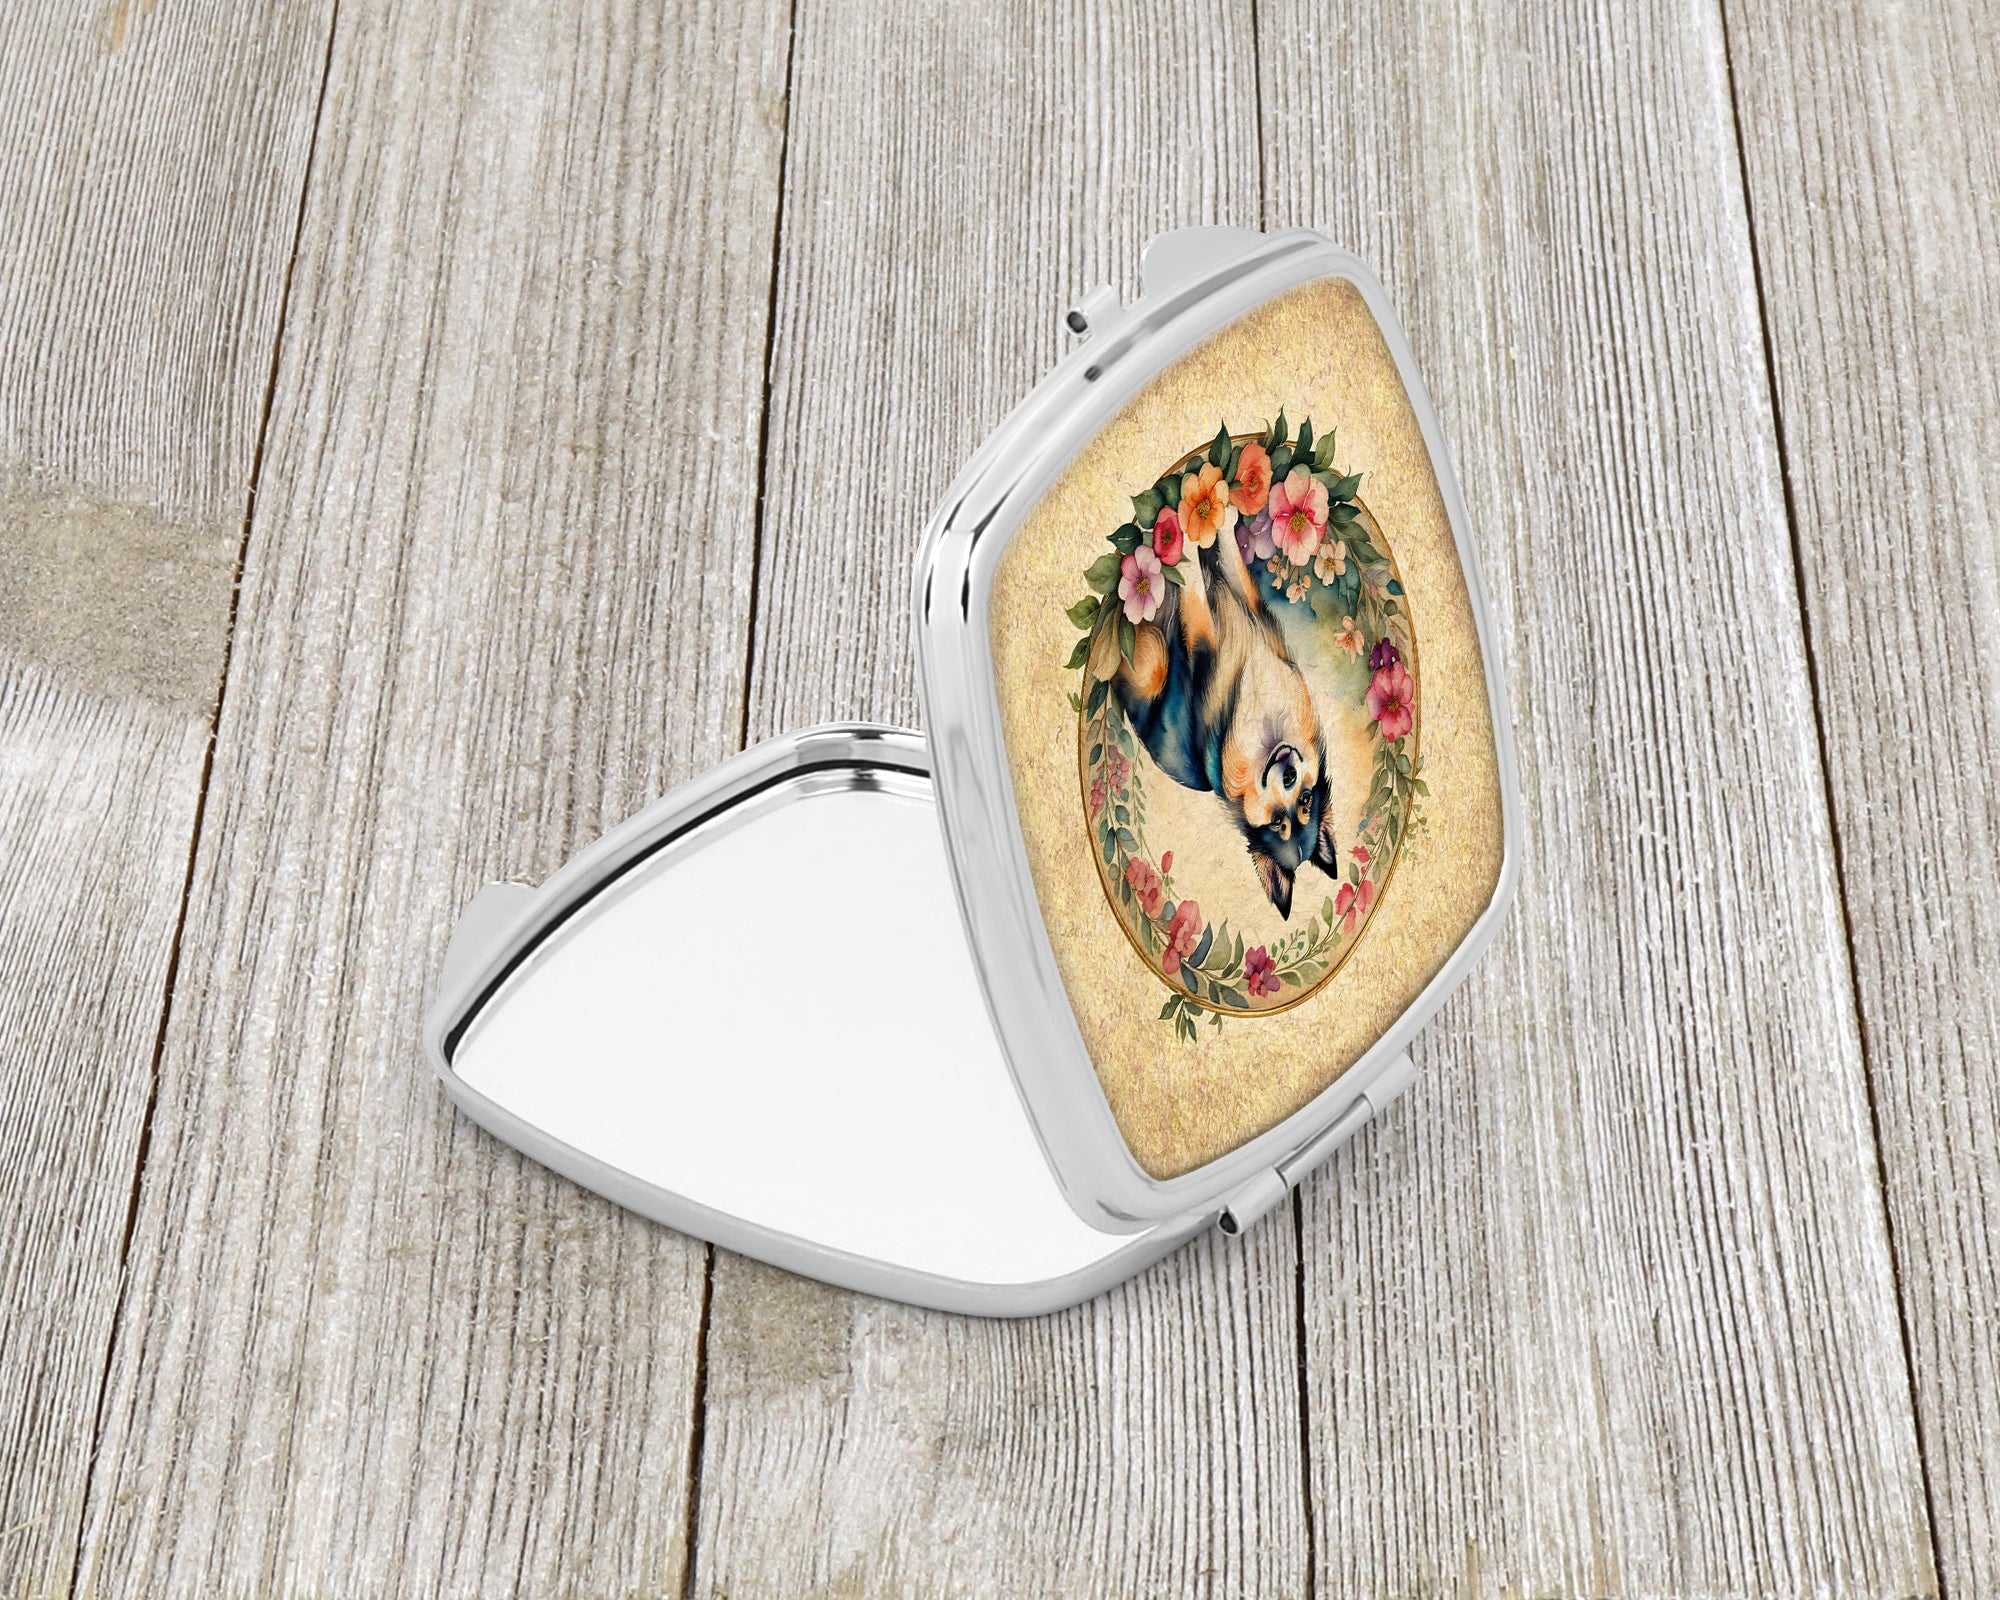 Finnish Lapphund and Flowers Compact Mirror